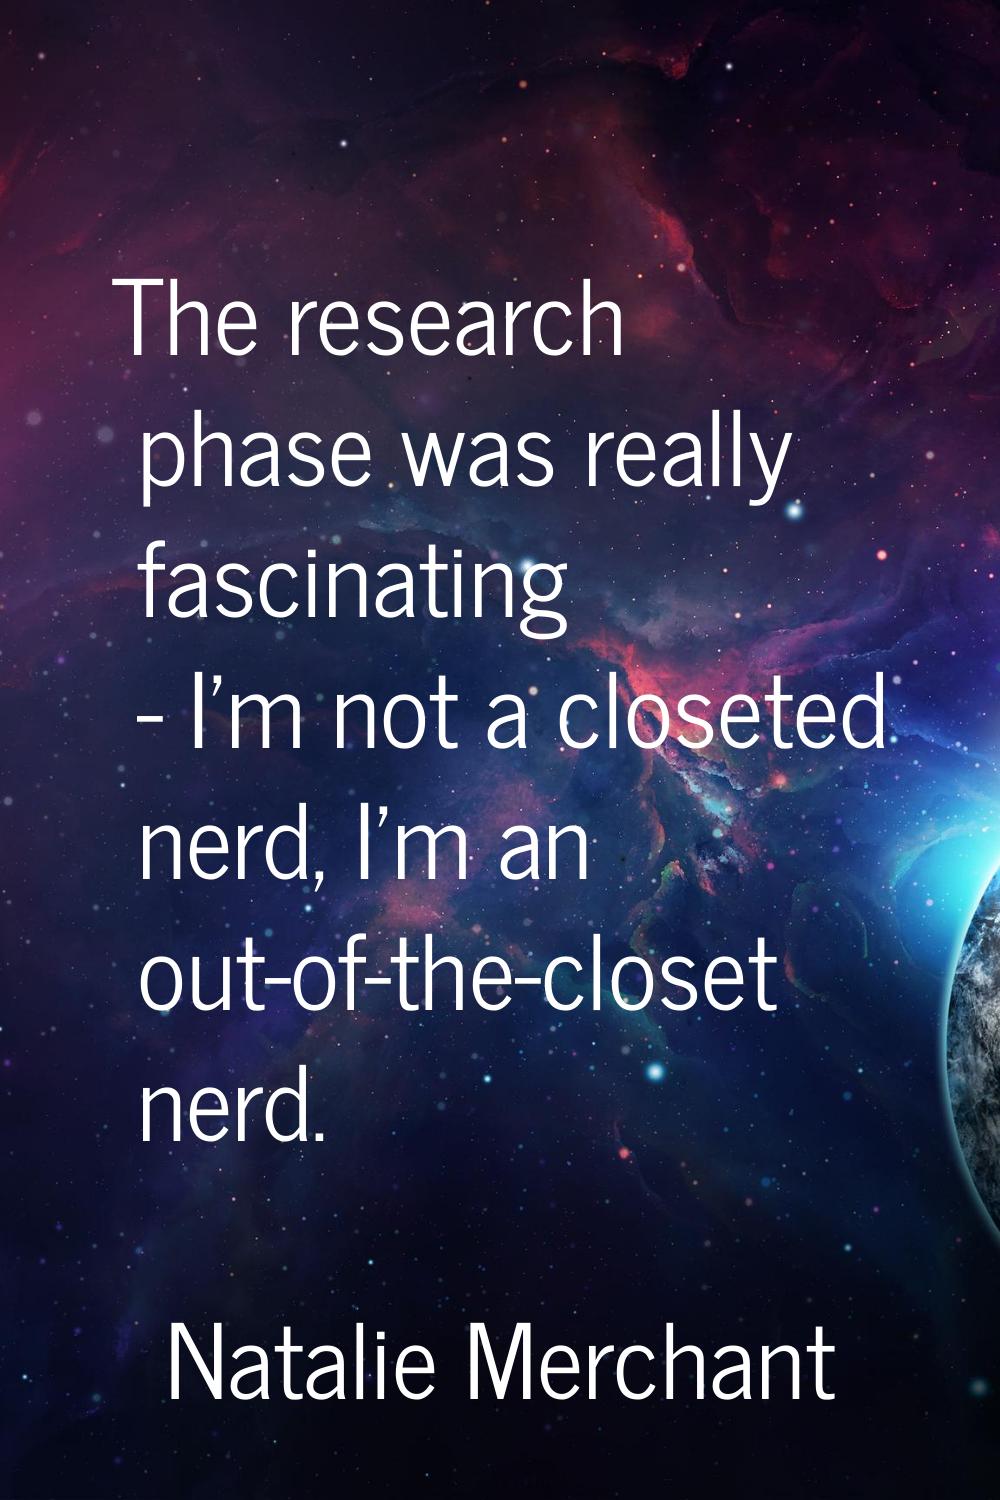 The research phase was really fascinating - I'm not a closeted nerd, I'm an out-of-the-closet nerd.